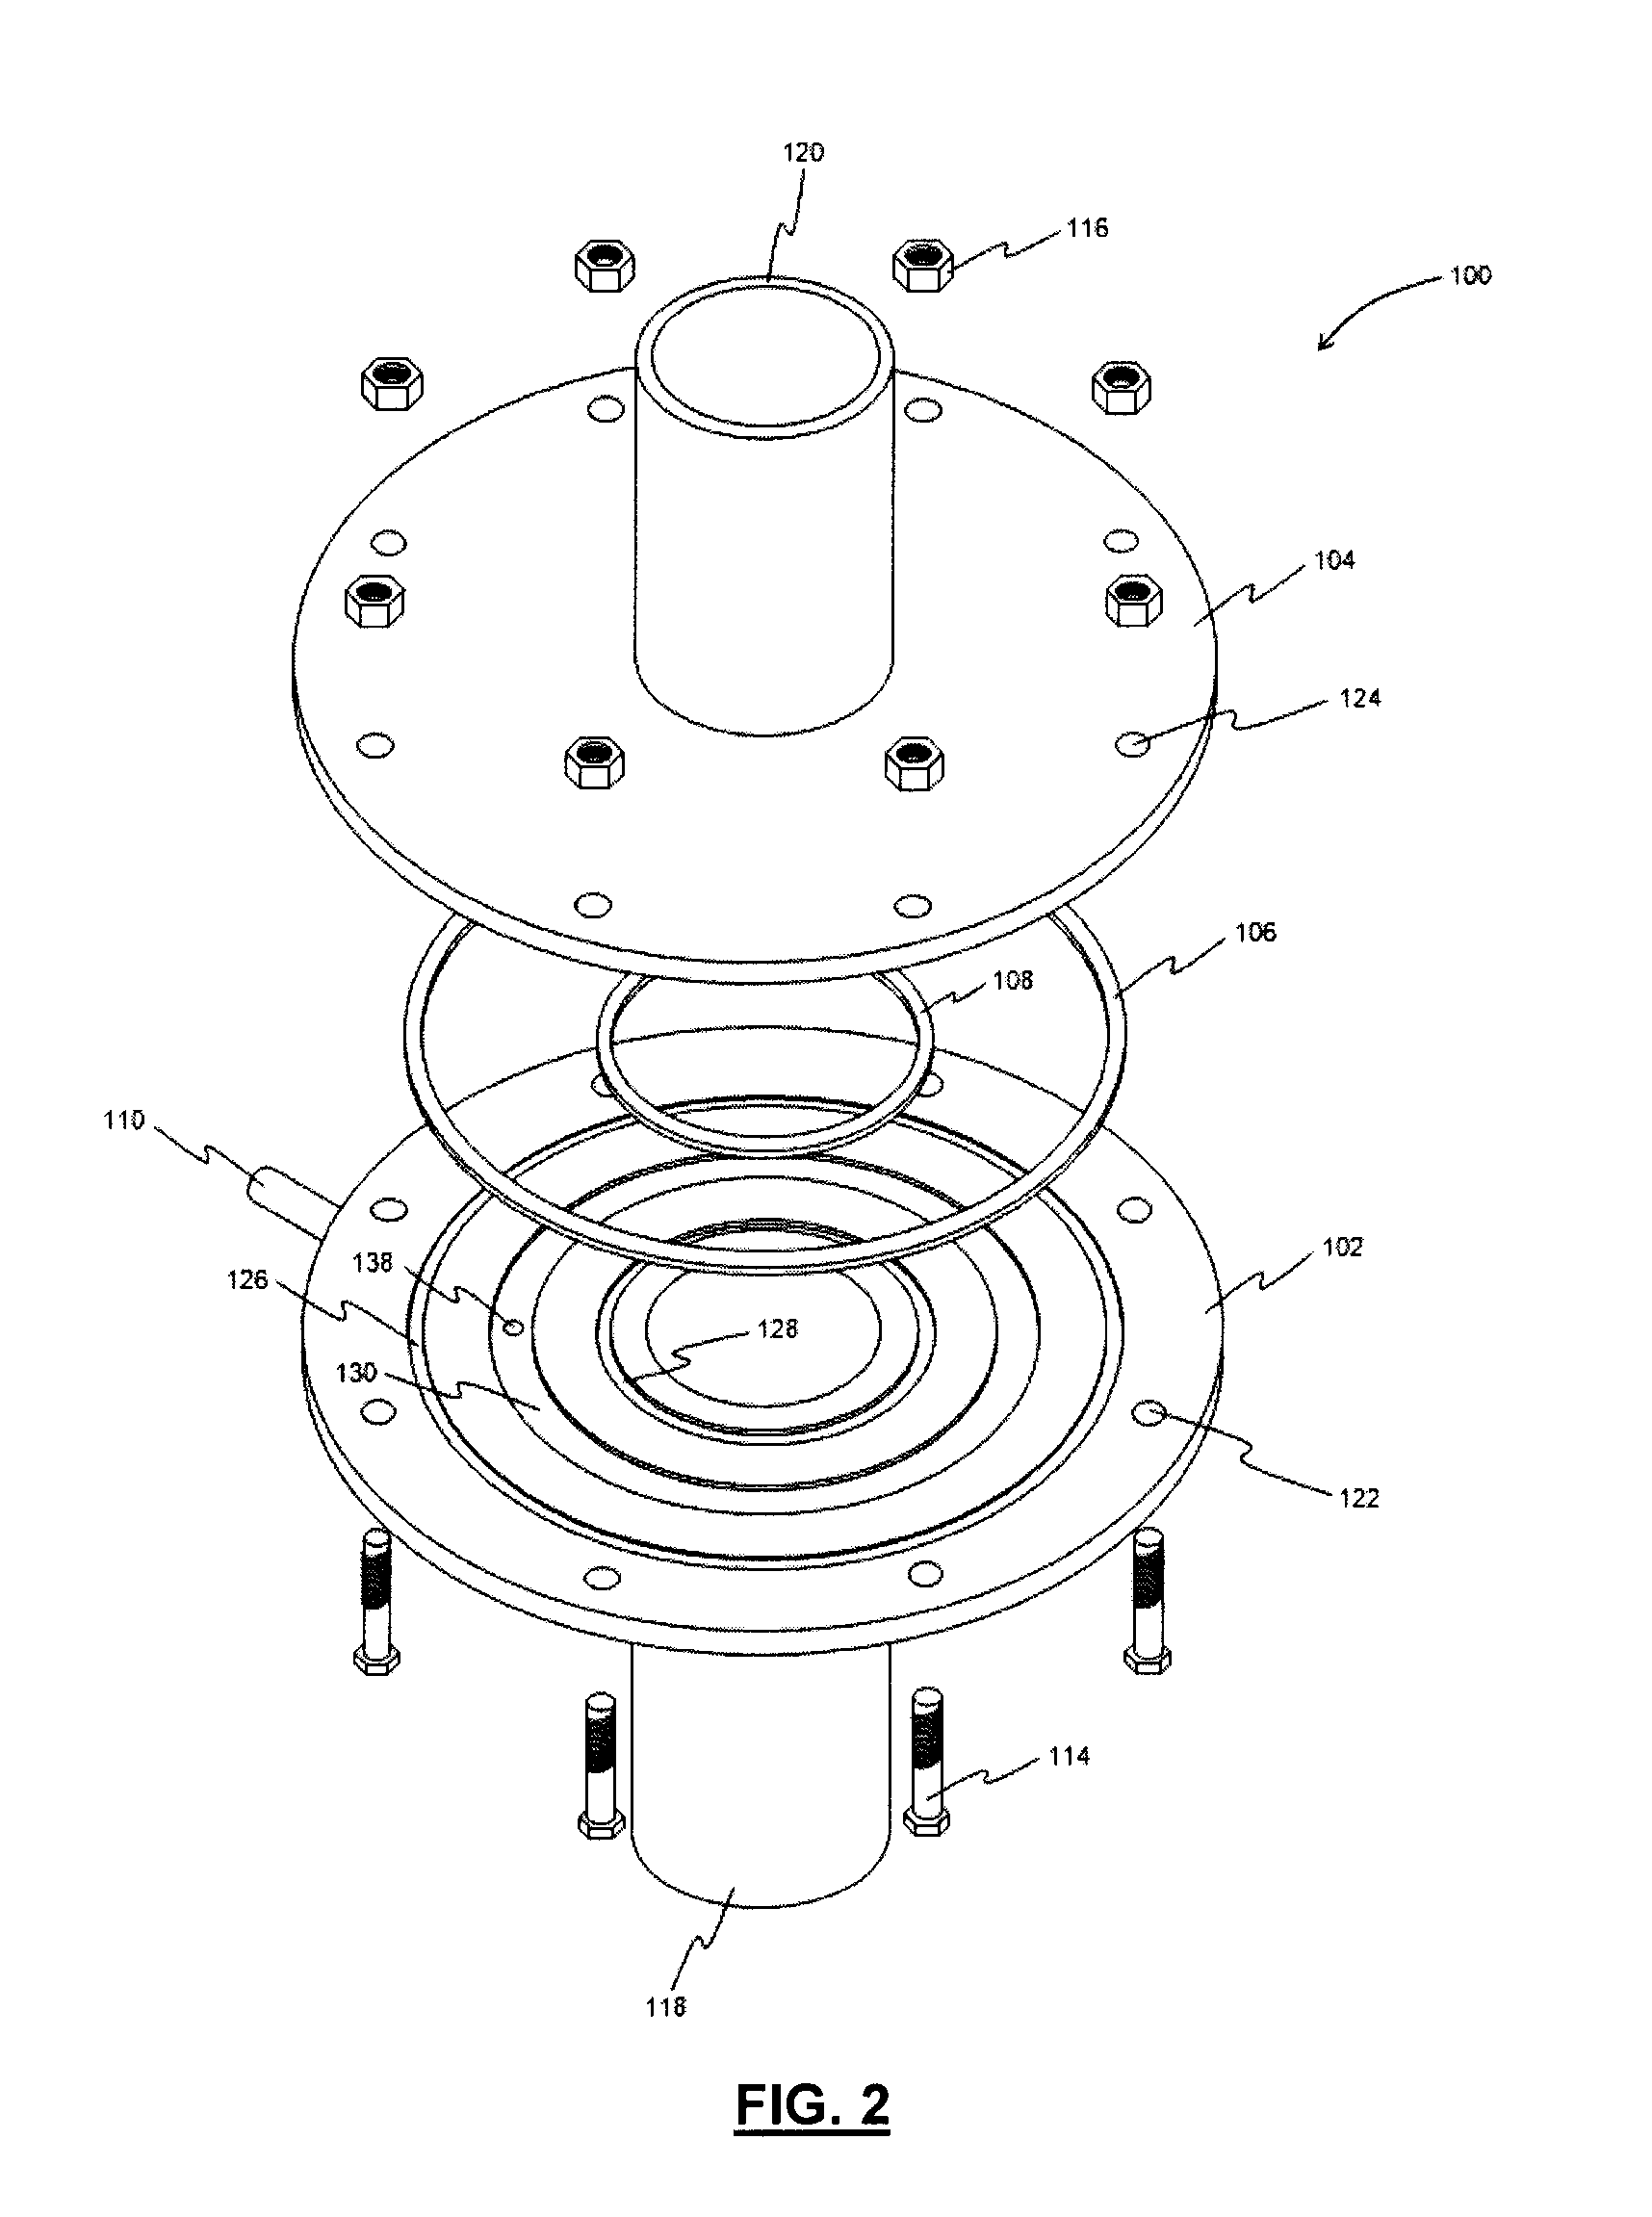 Conduit connection apparatus with purge gas